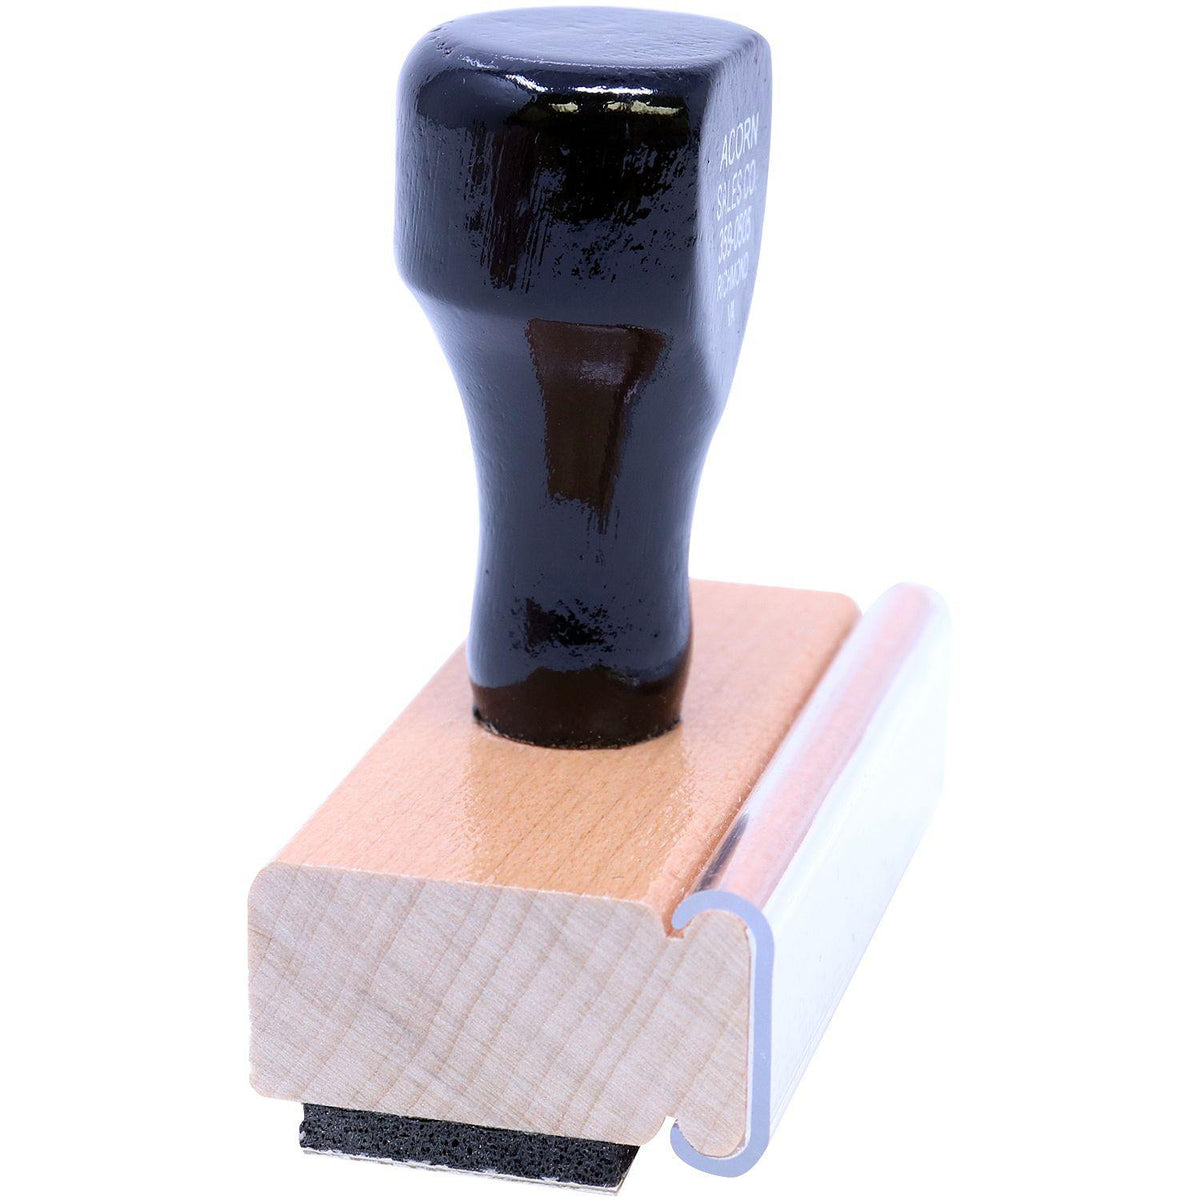 Side View of Large E-mailed with Date Box Rubber Stamp at an Angle